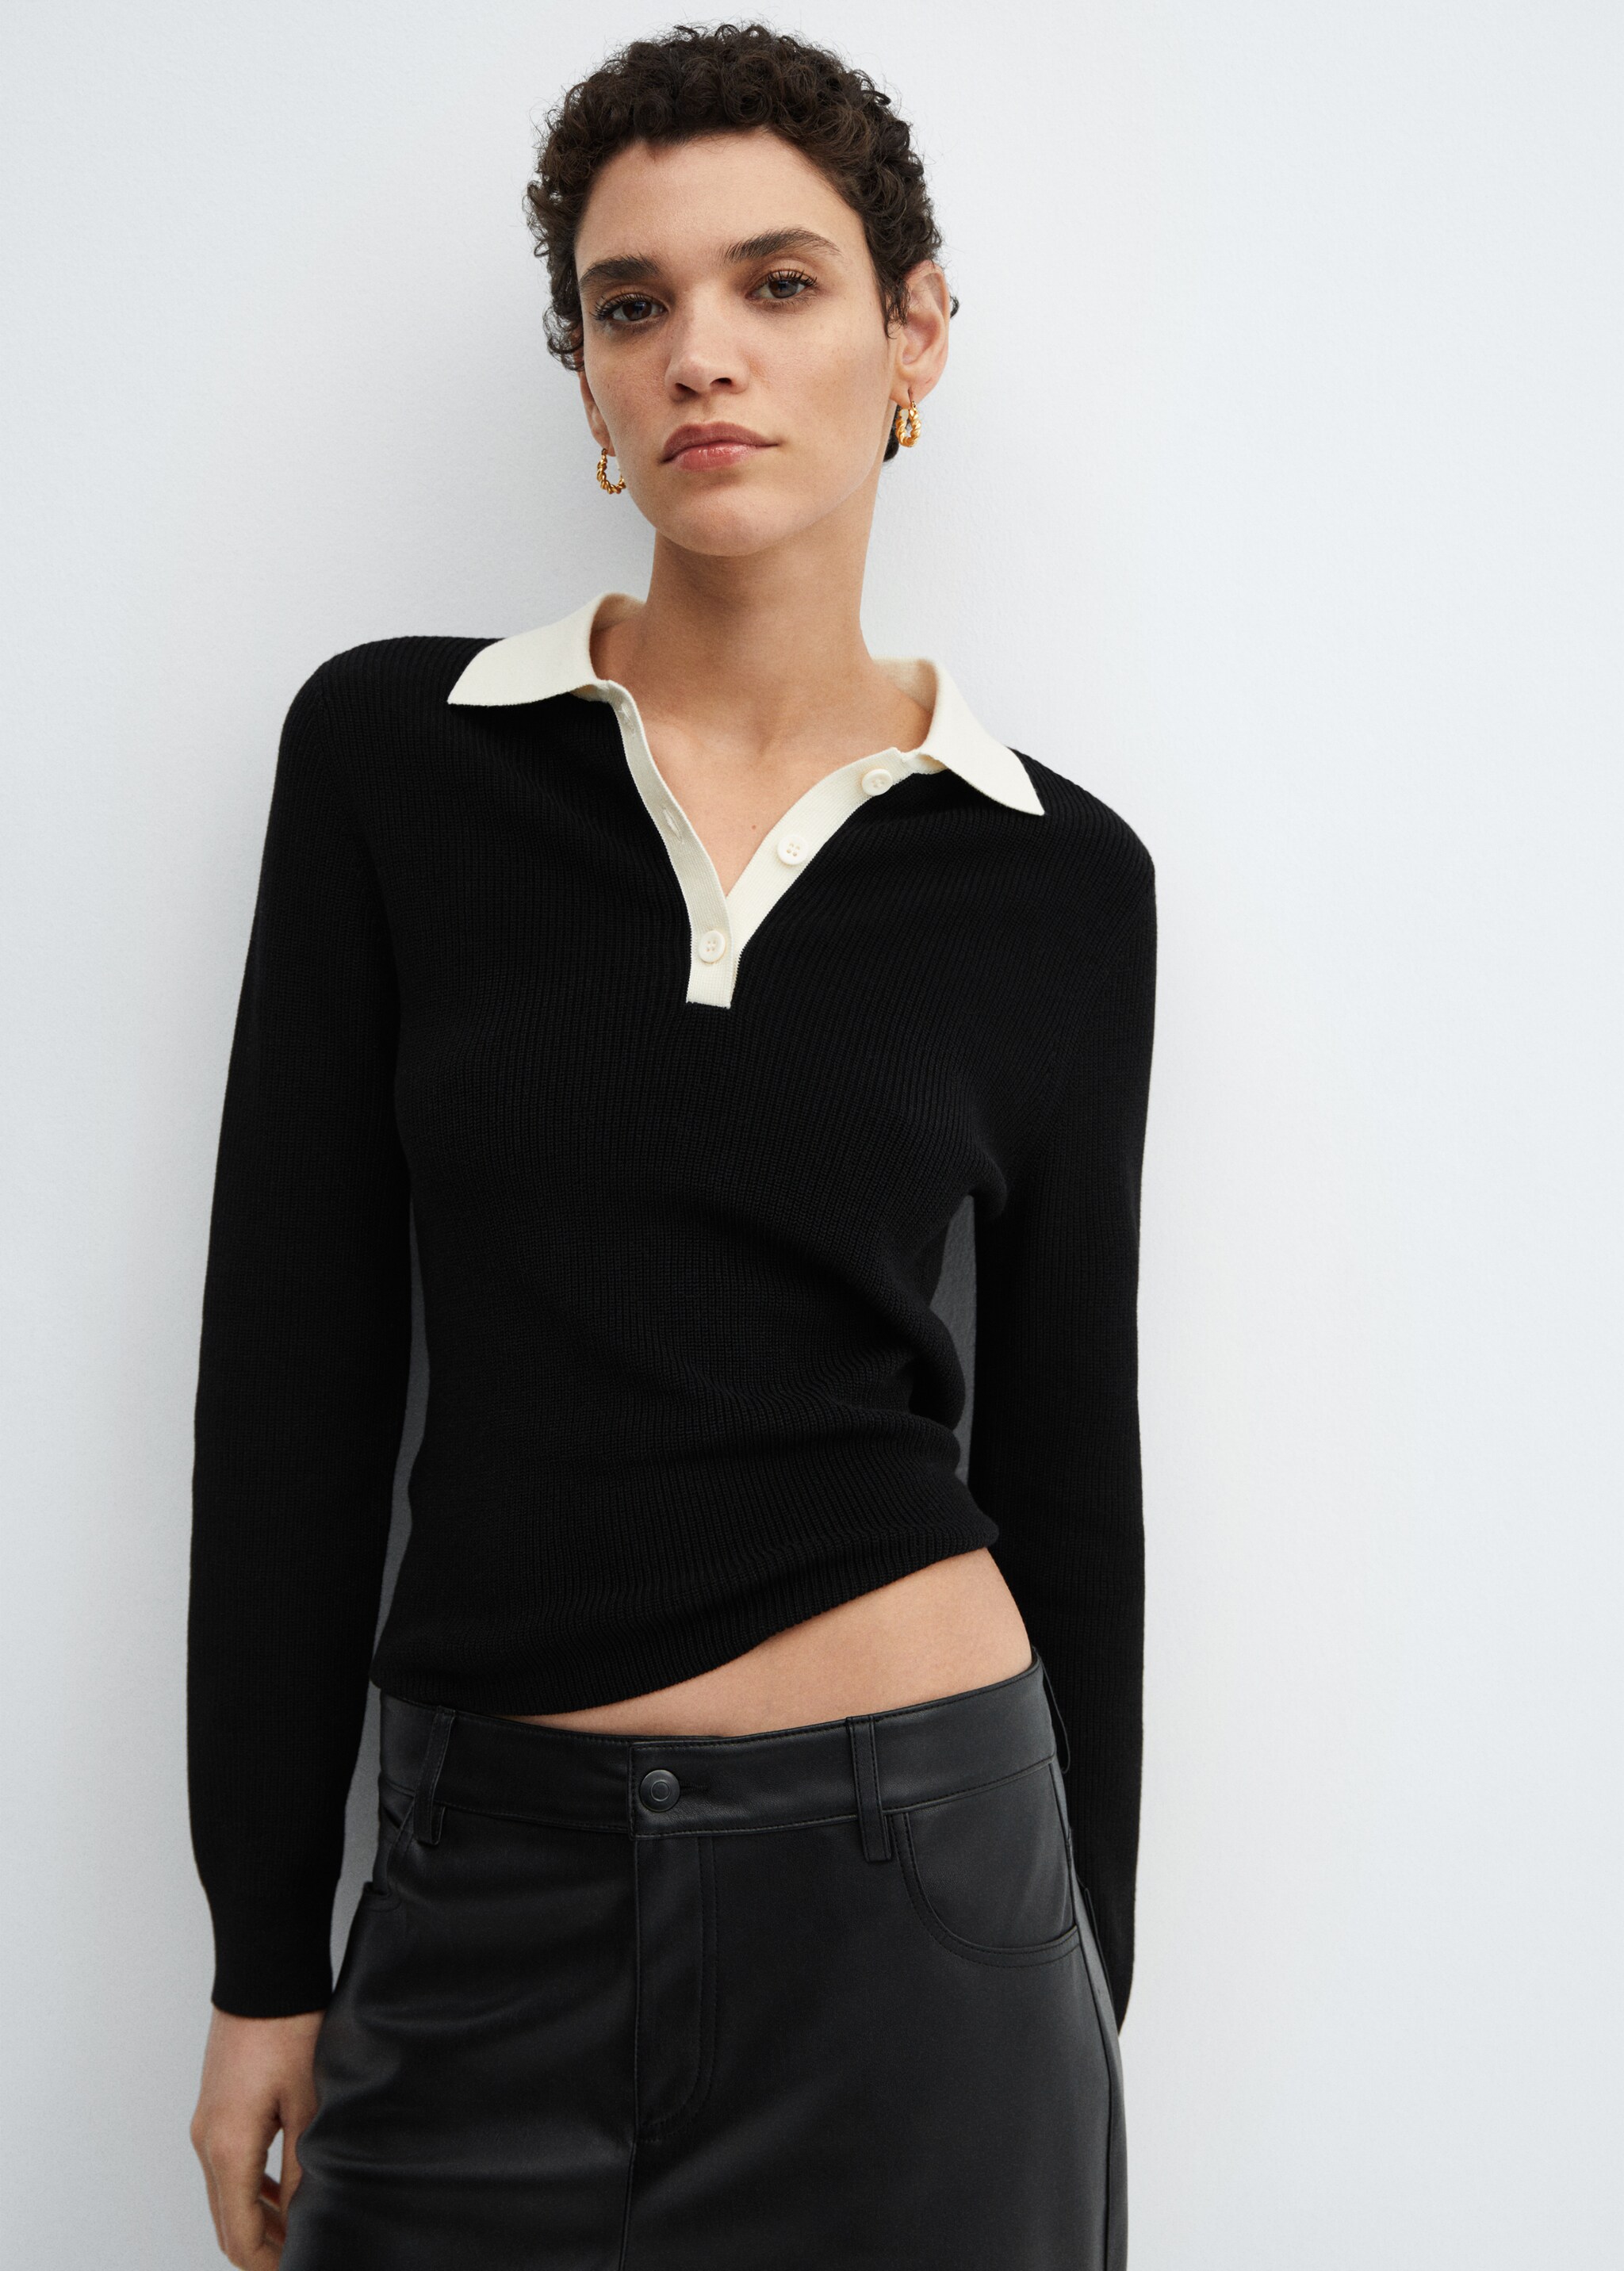 Knitted polo neck sweater - Medium plane